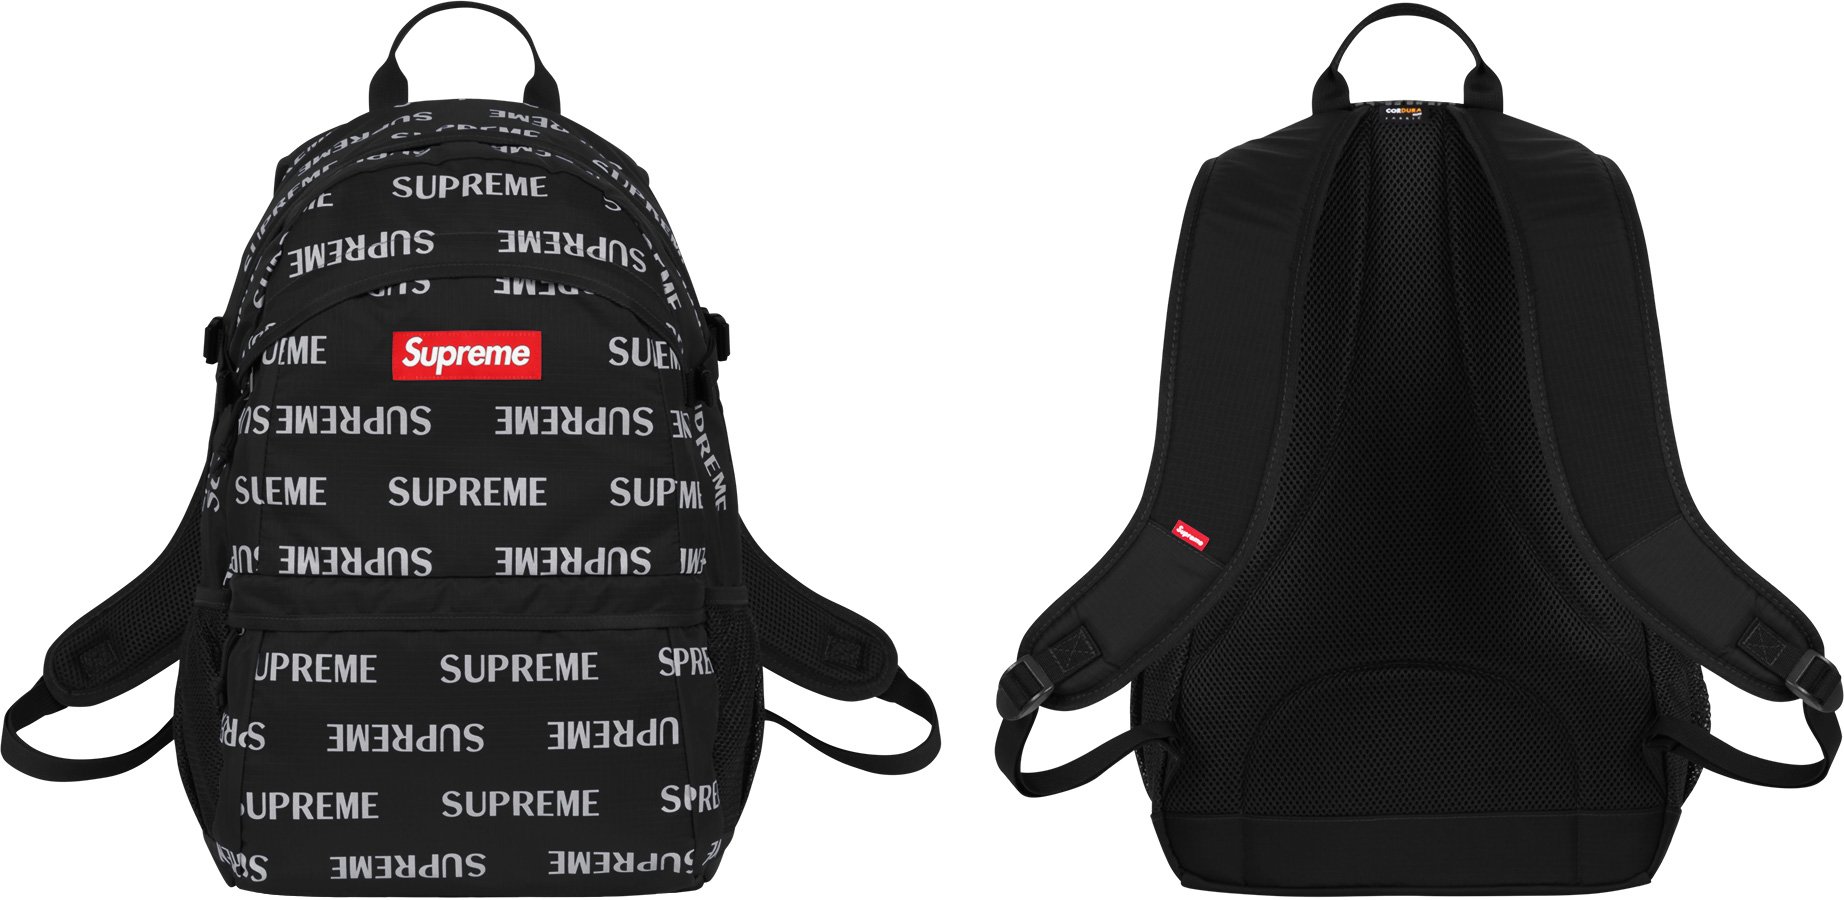 3M Reflective Repeat Backpack - fall winter 2016 - Supreme